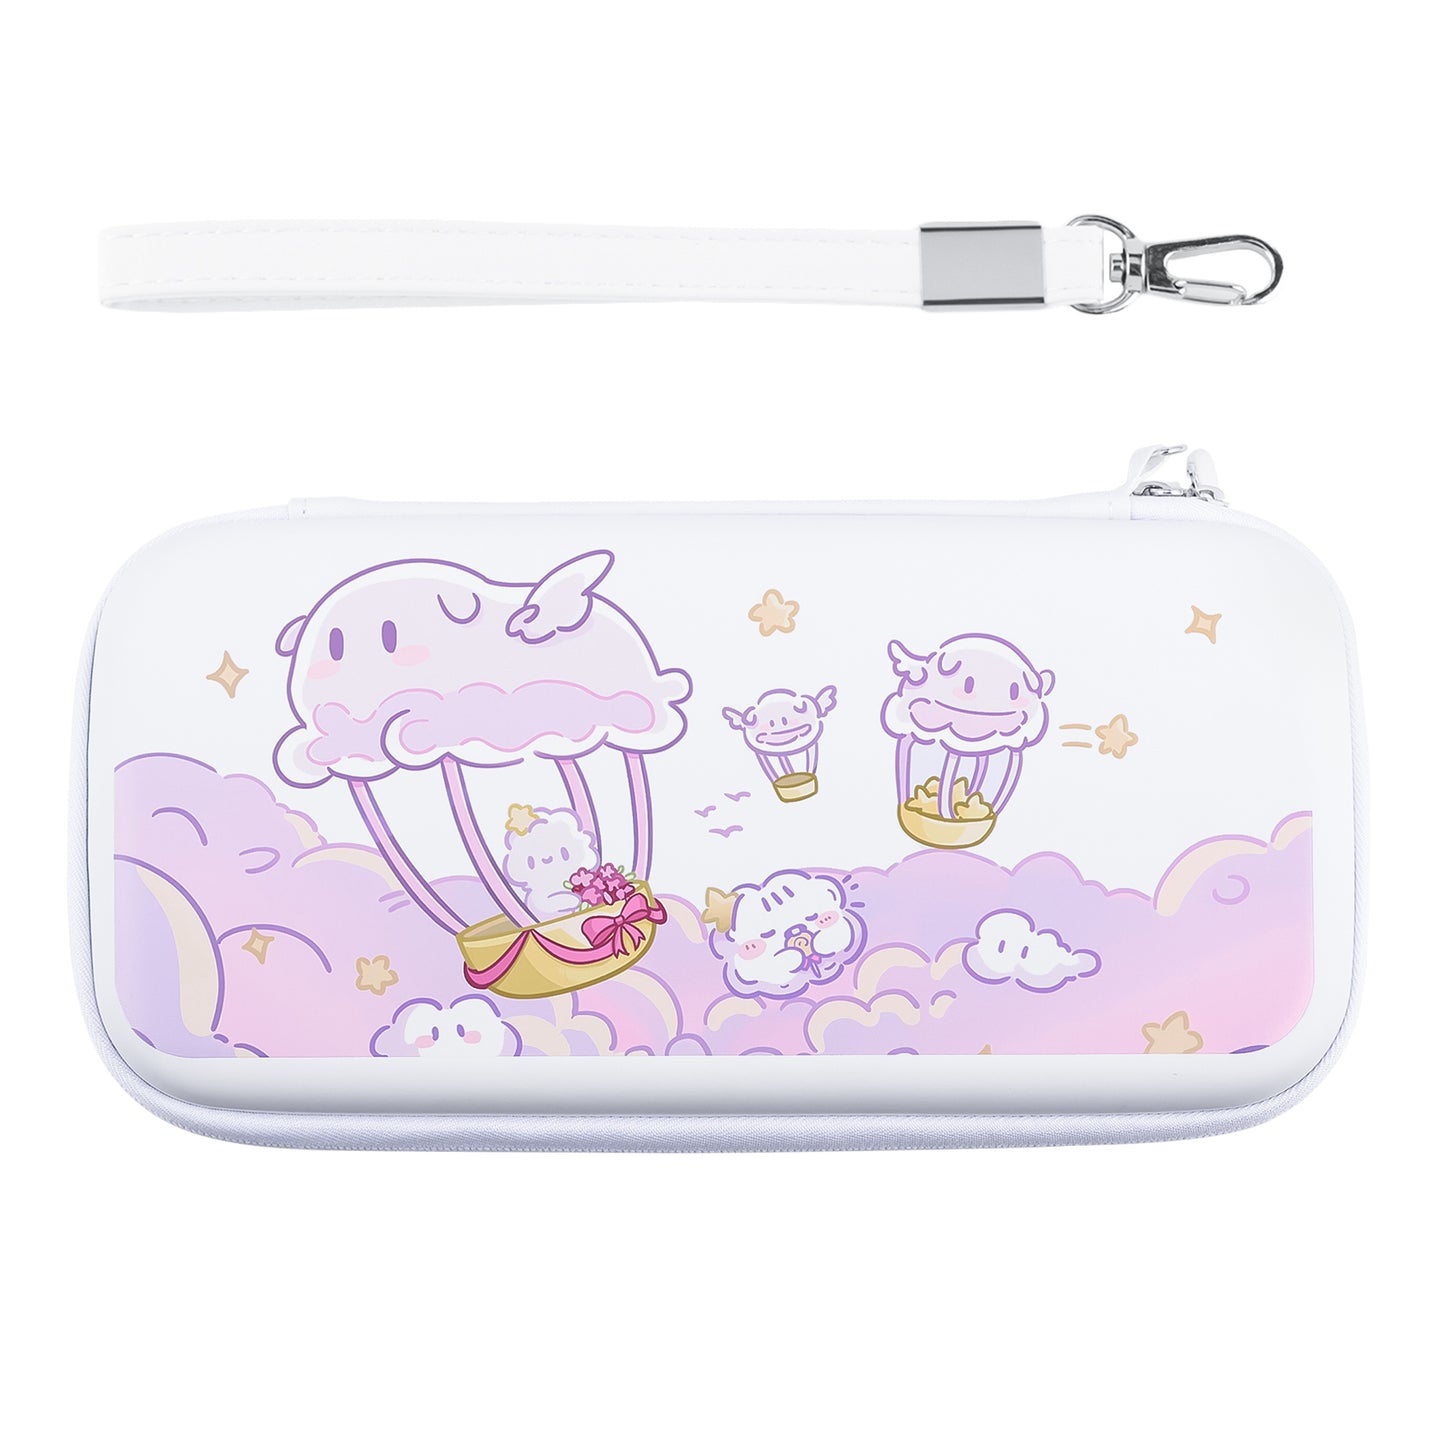 Carrying Case - Clouds  (For both switch Oled & switch)